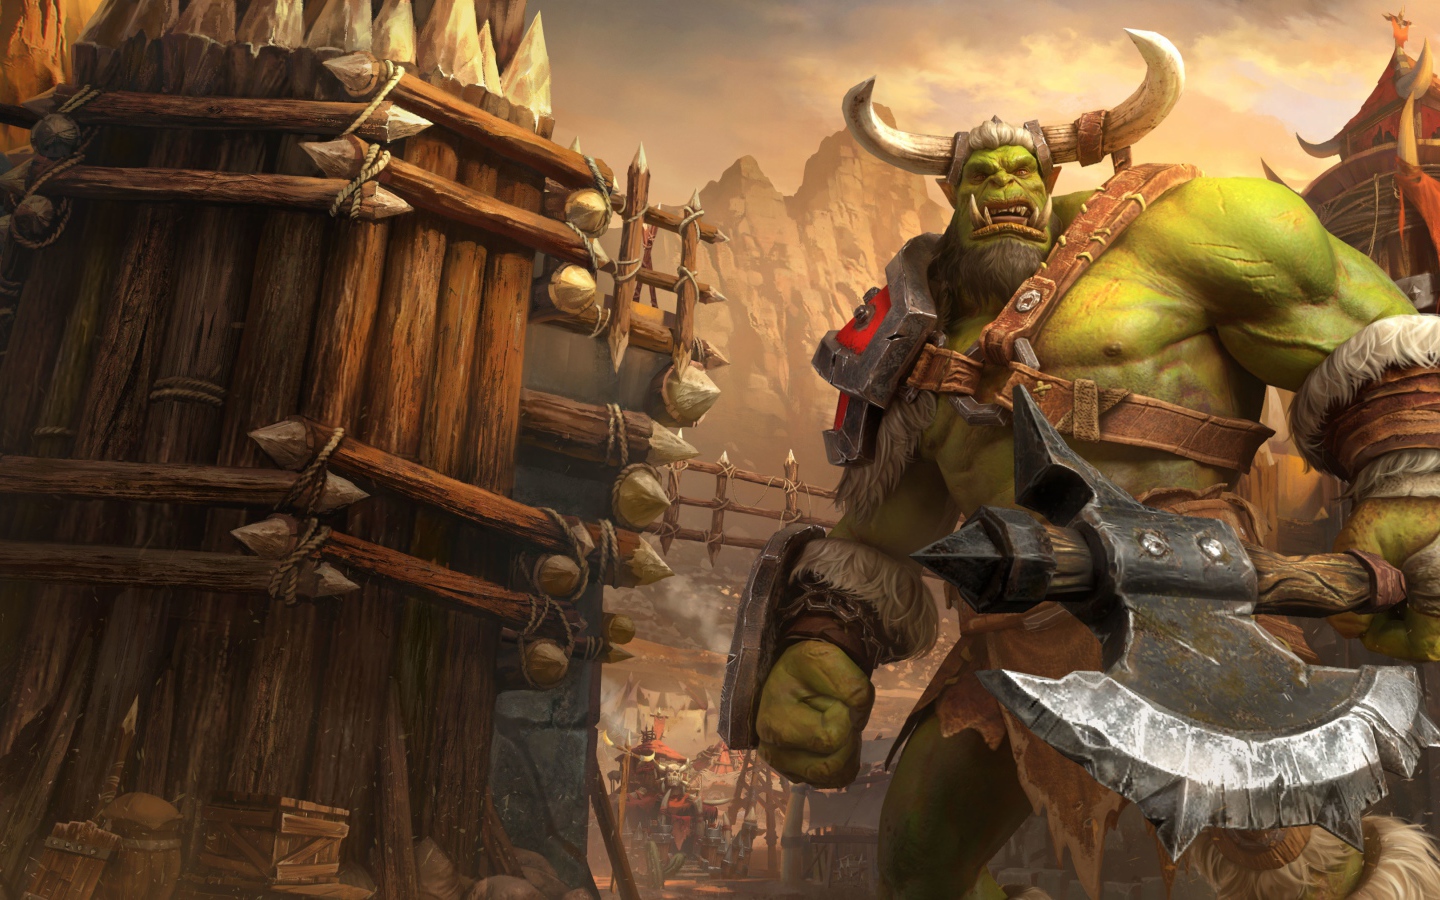 Orc from the computer game Warcraft III: Reforged